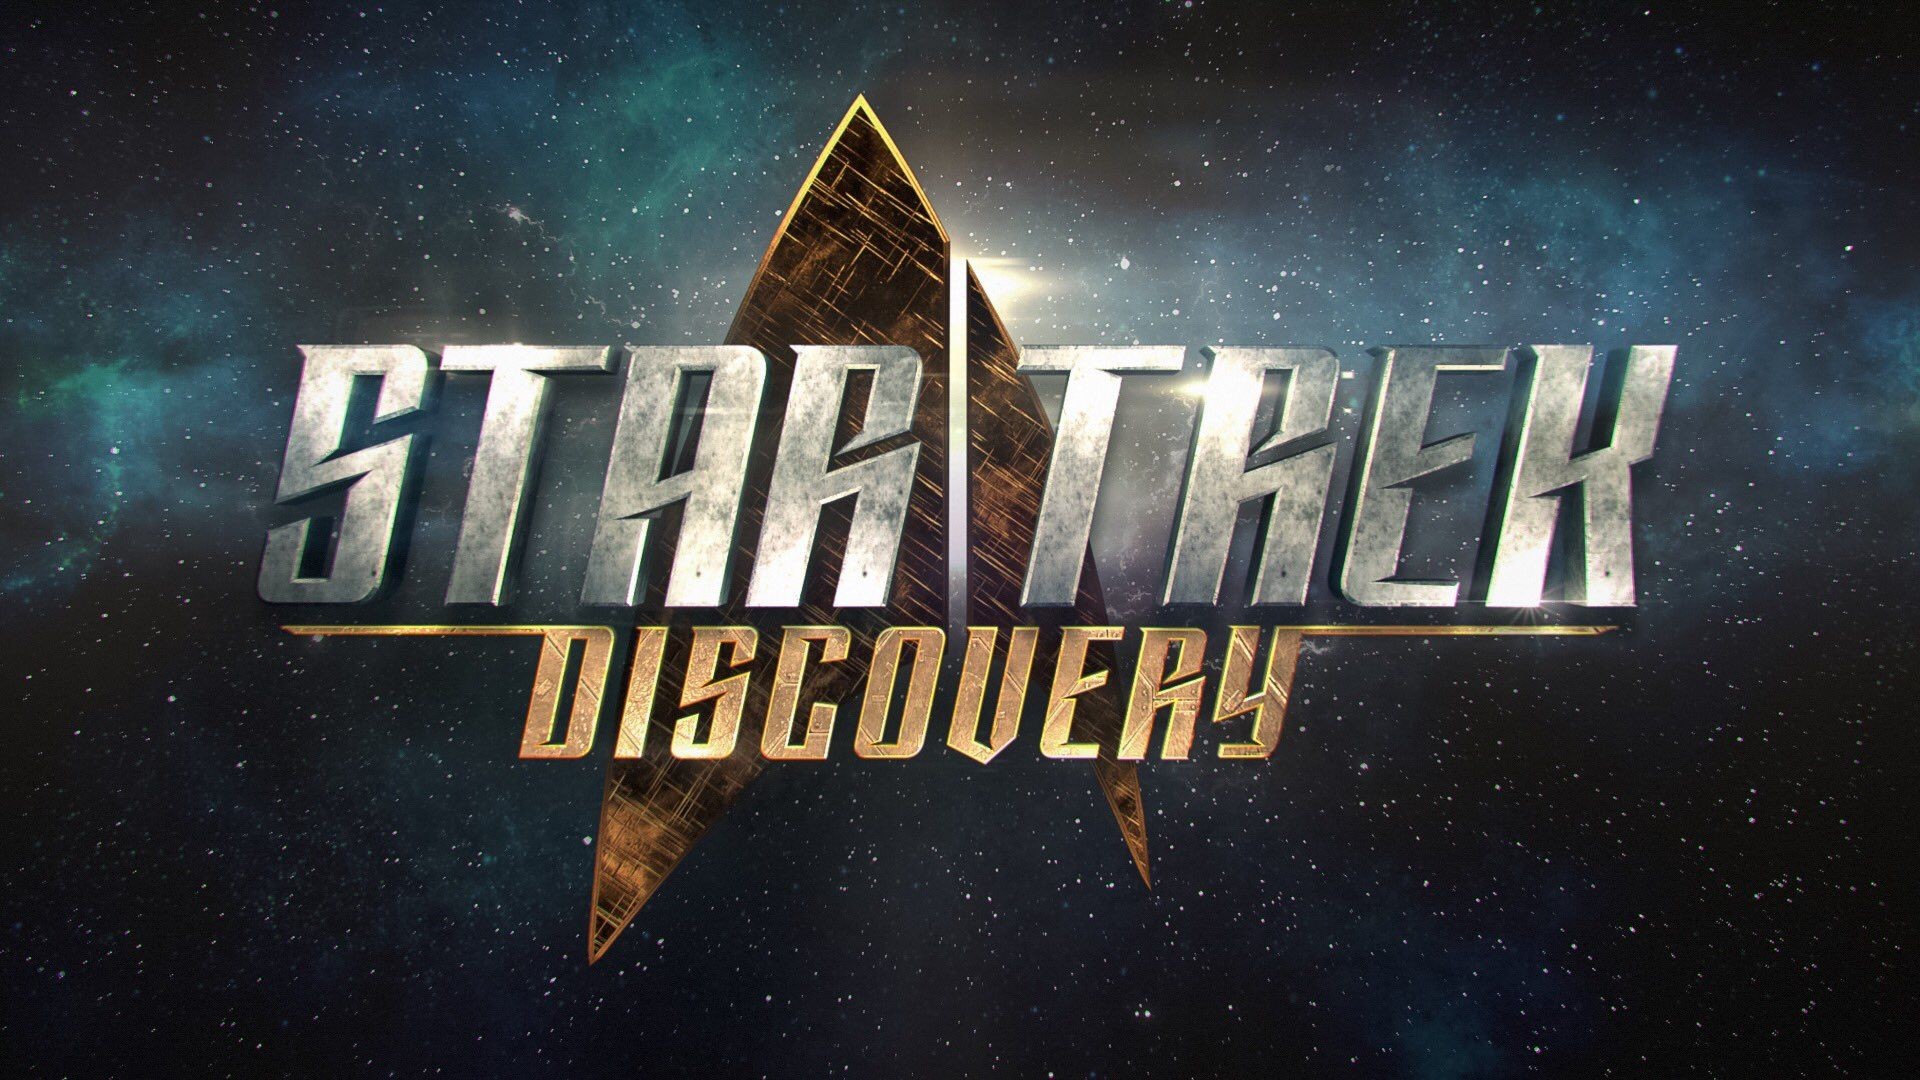 1920x1080 Pictures of star trek discovery hd Wallpapers - Image Cluster